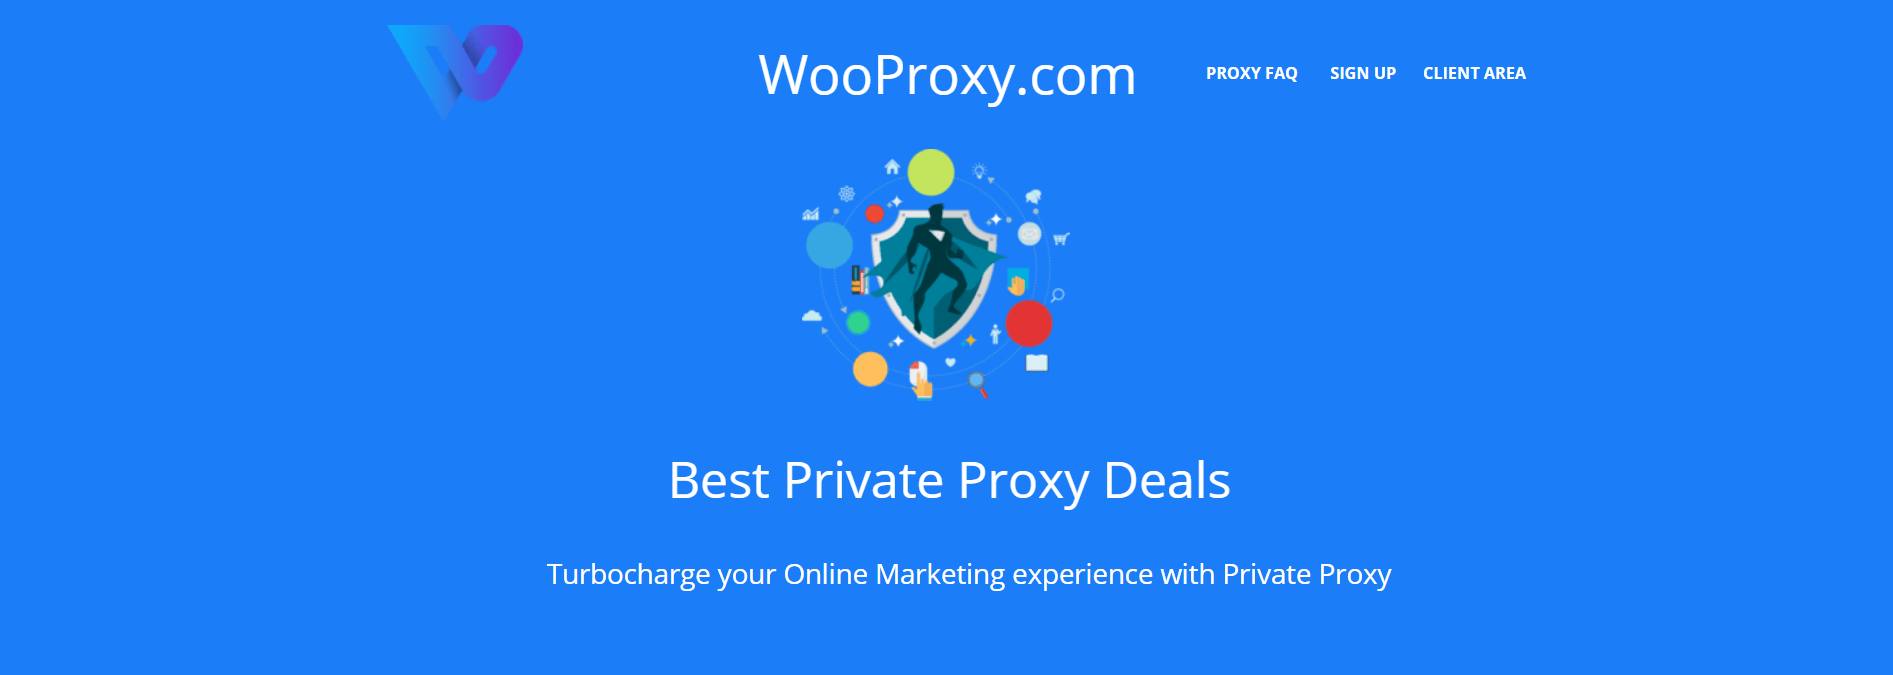 WooProxy Shared Proxies and Dedicated Proxies